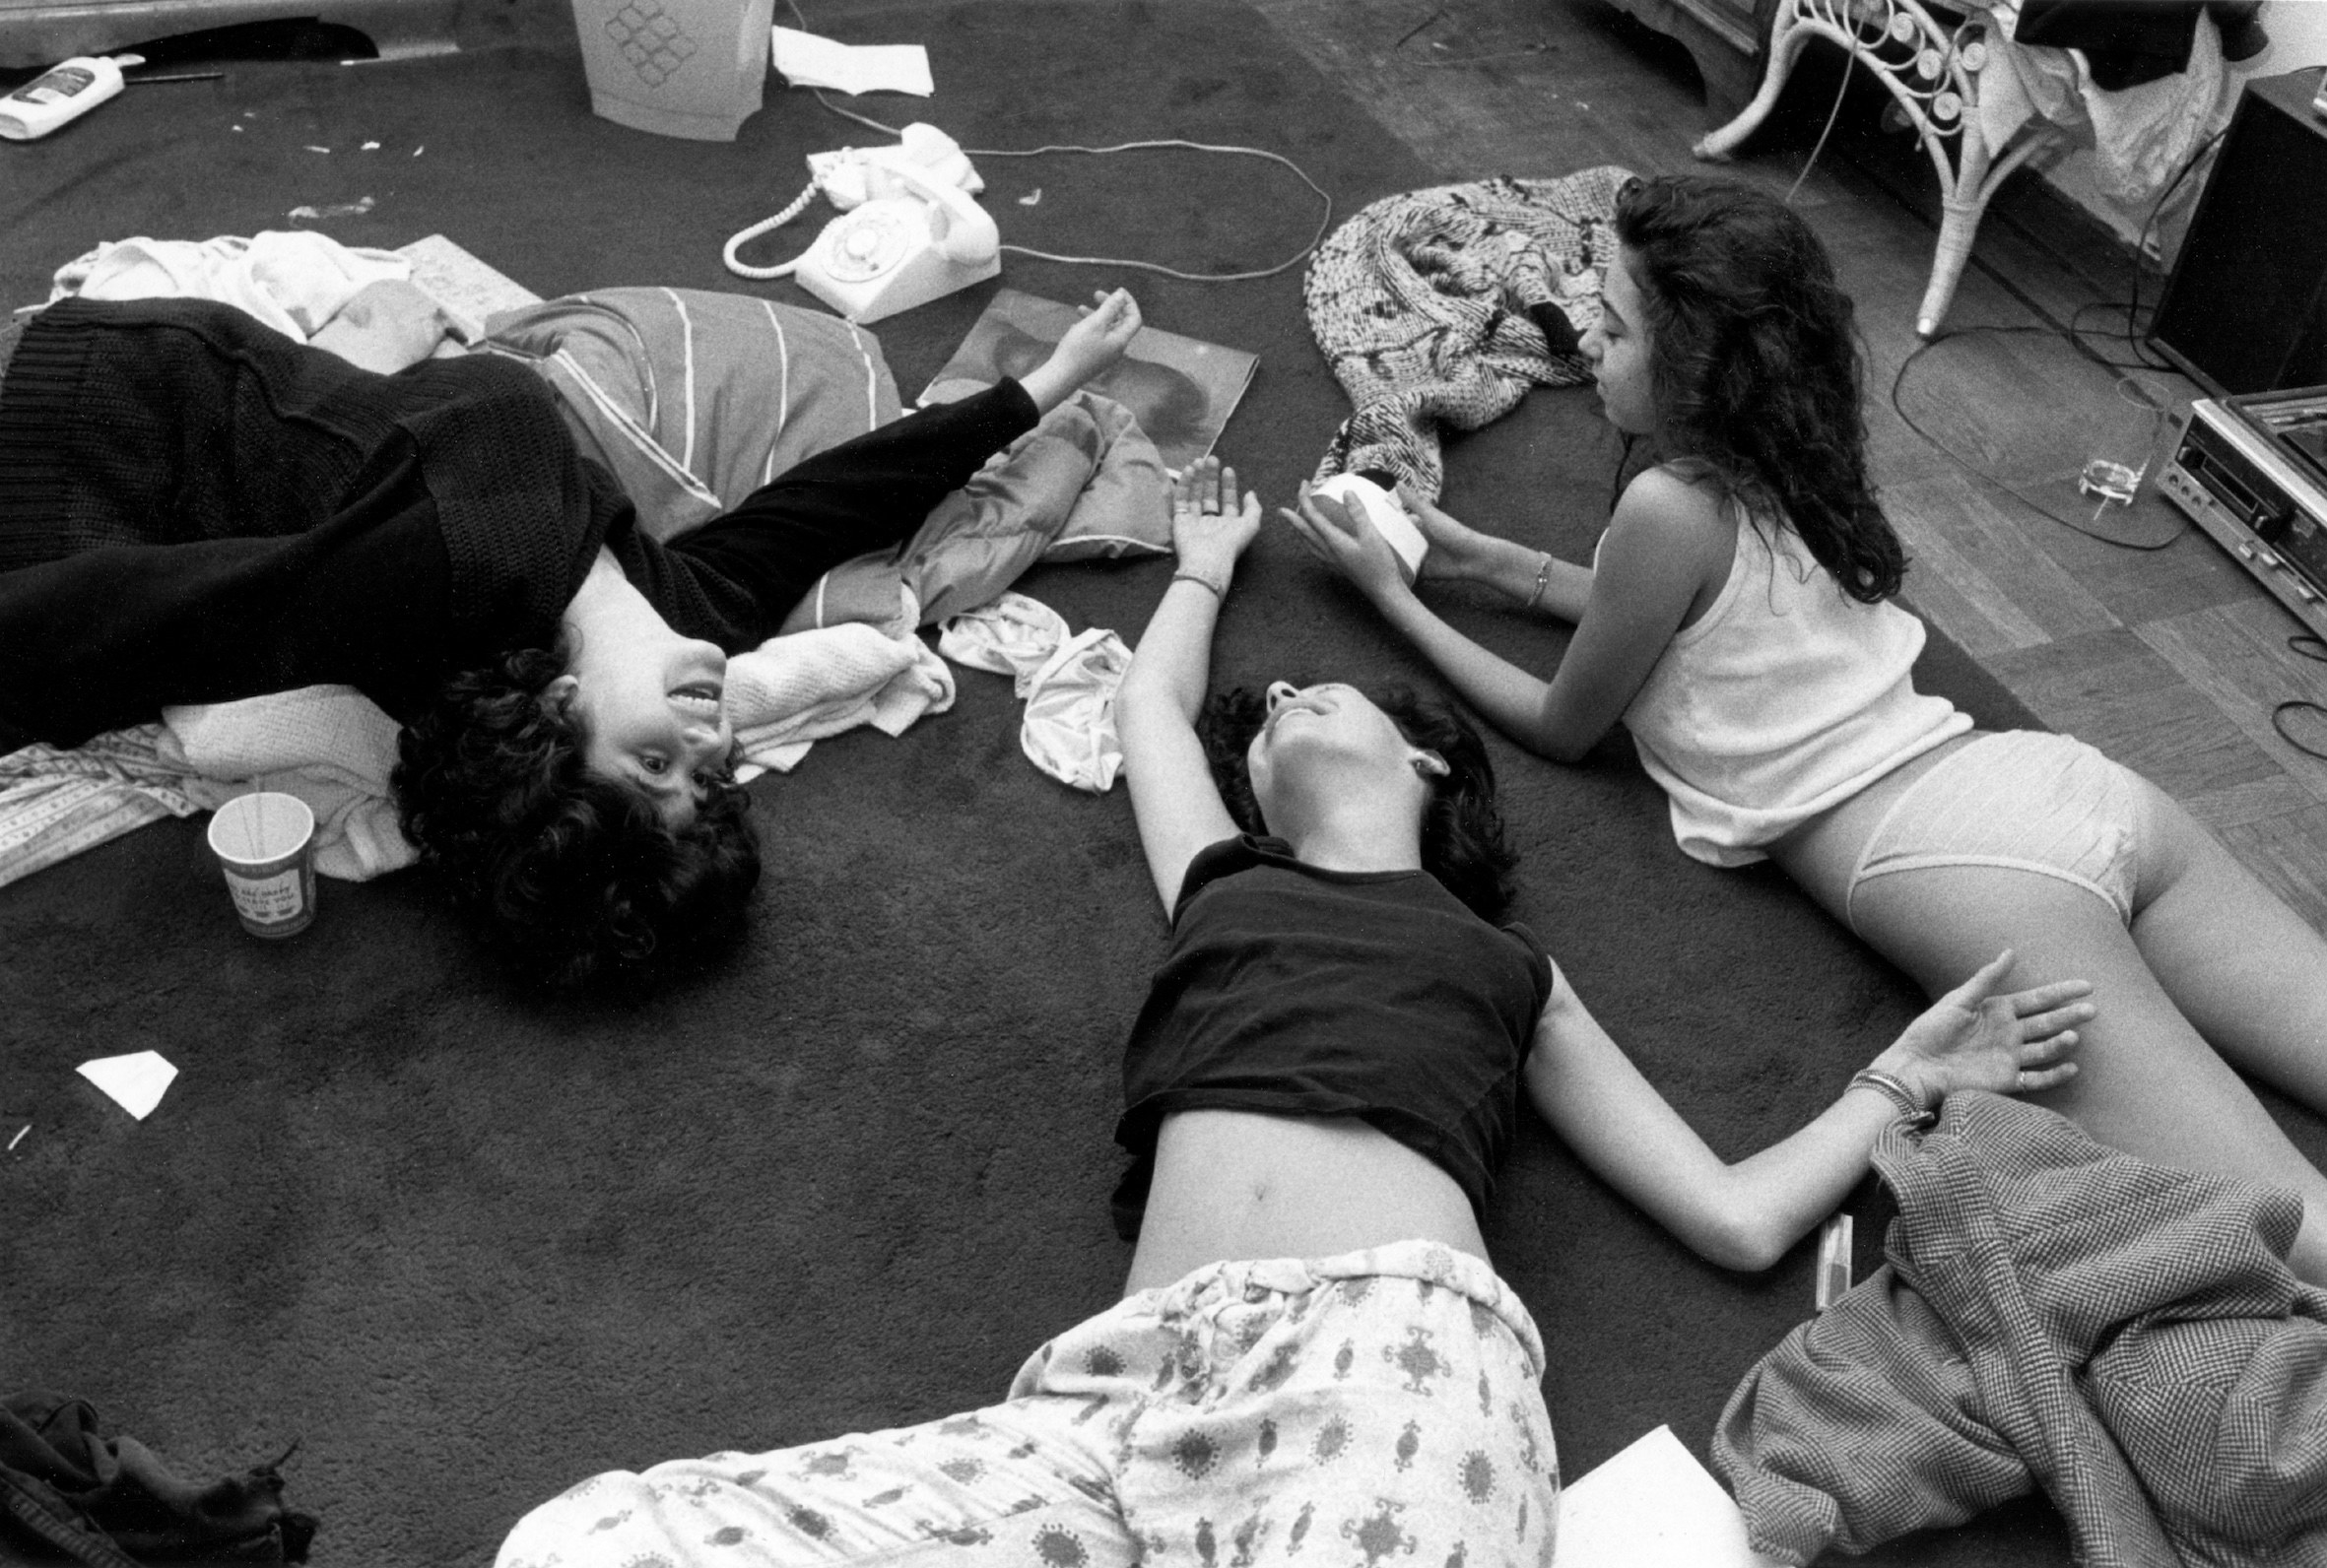 three girls lie on the floor in pajamas with phones, coffee cups, and some other items around them 